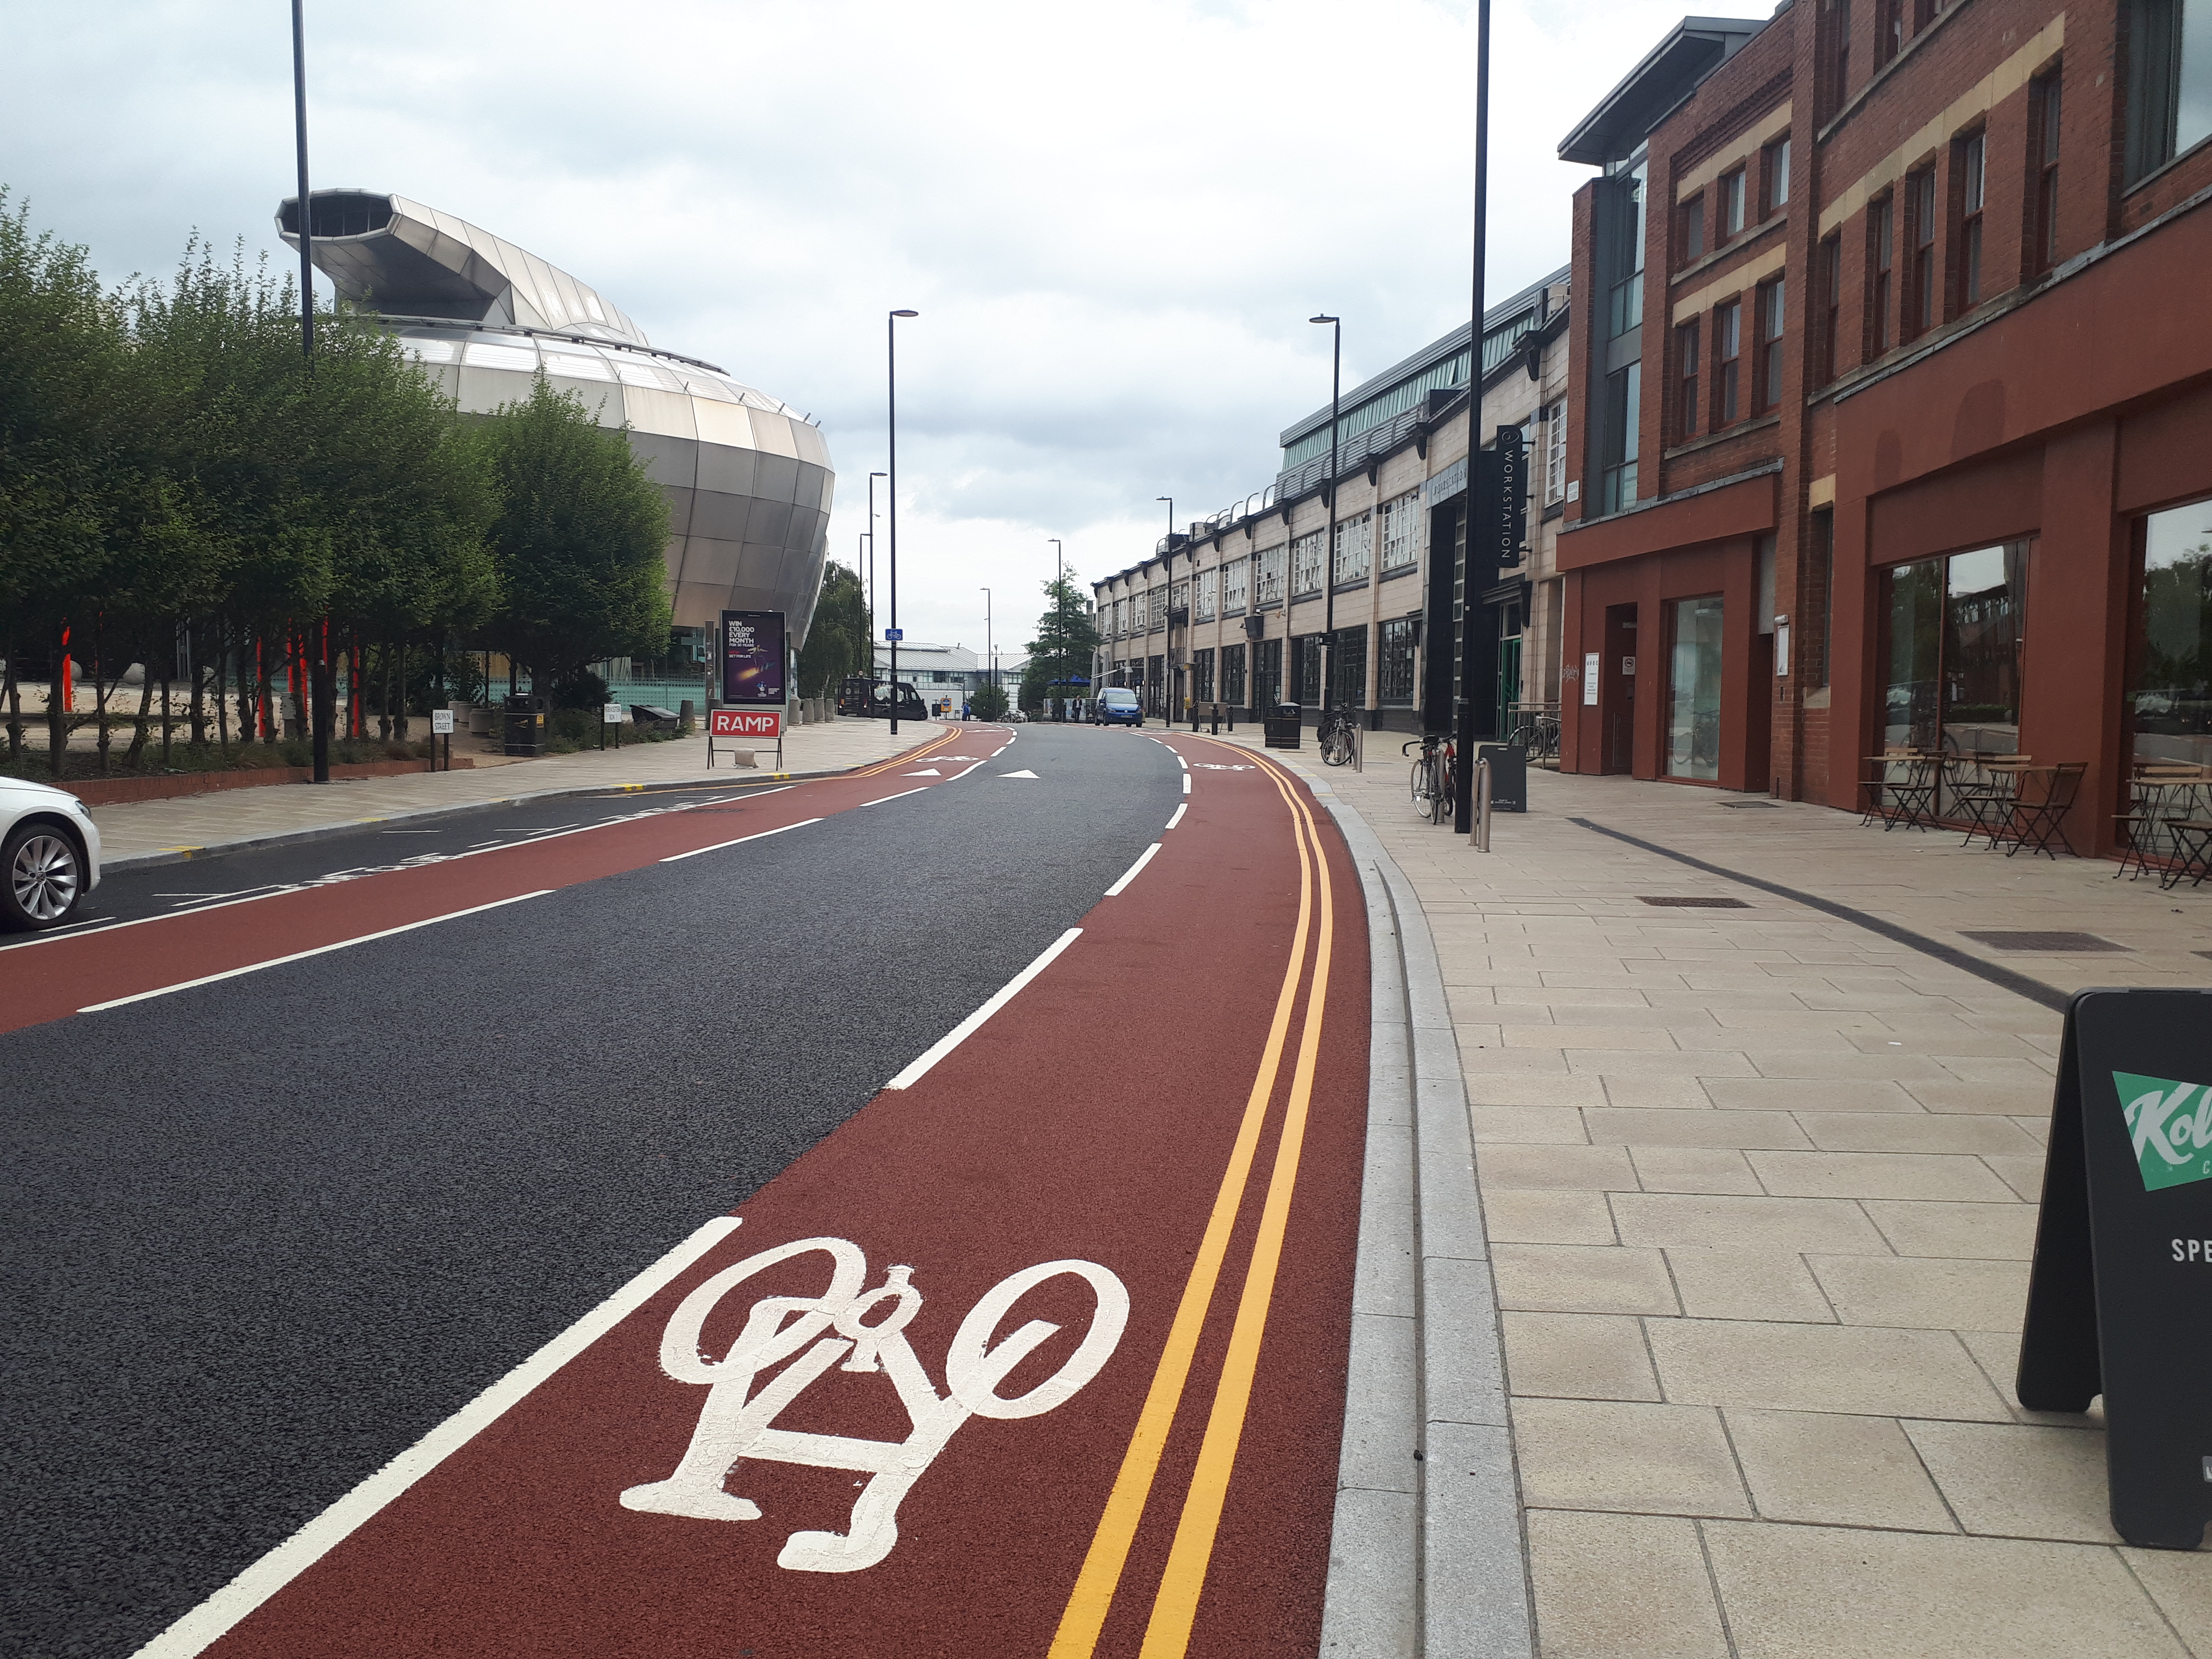 Surfacing The Town Red: Aggregate Industries supplies red asphalt to Sheffield cycle lane @AggregateUK